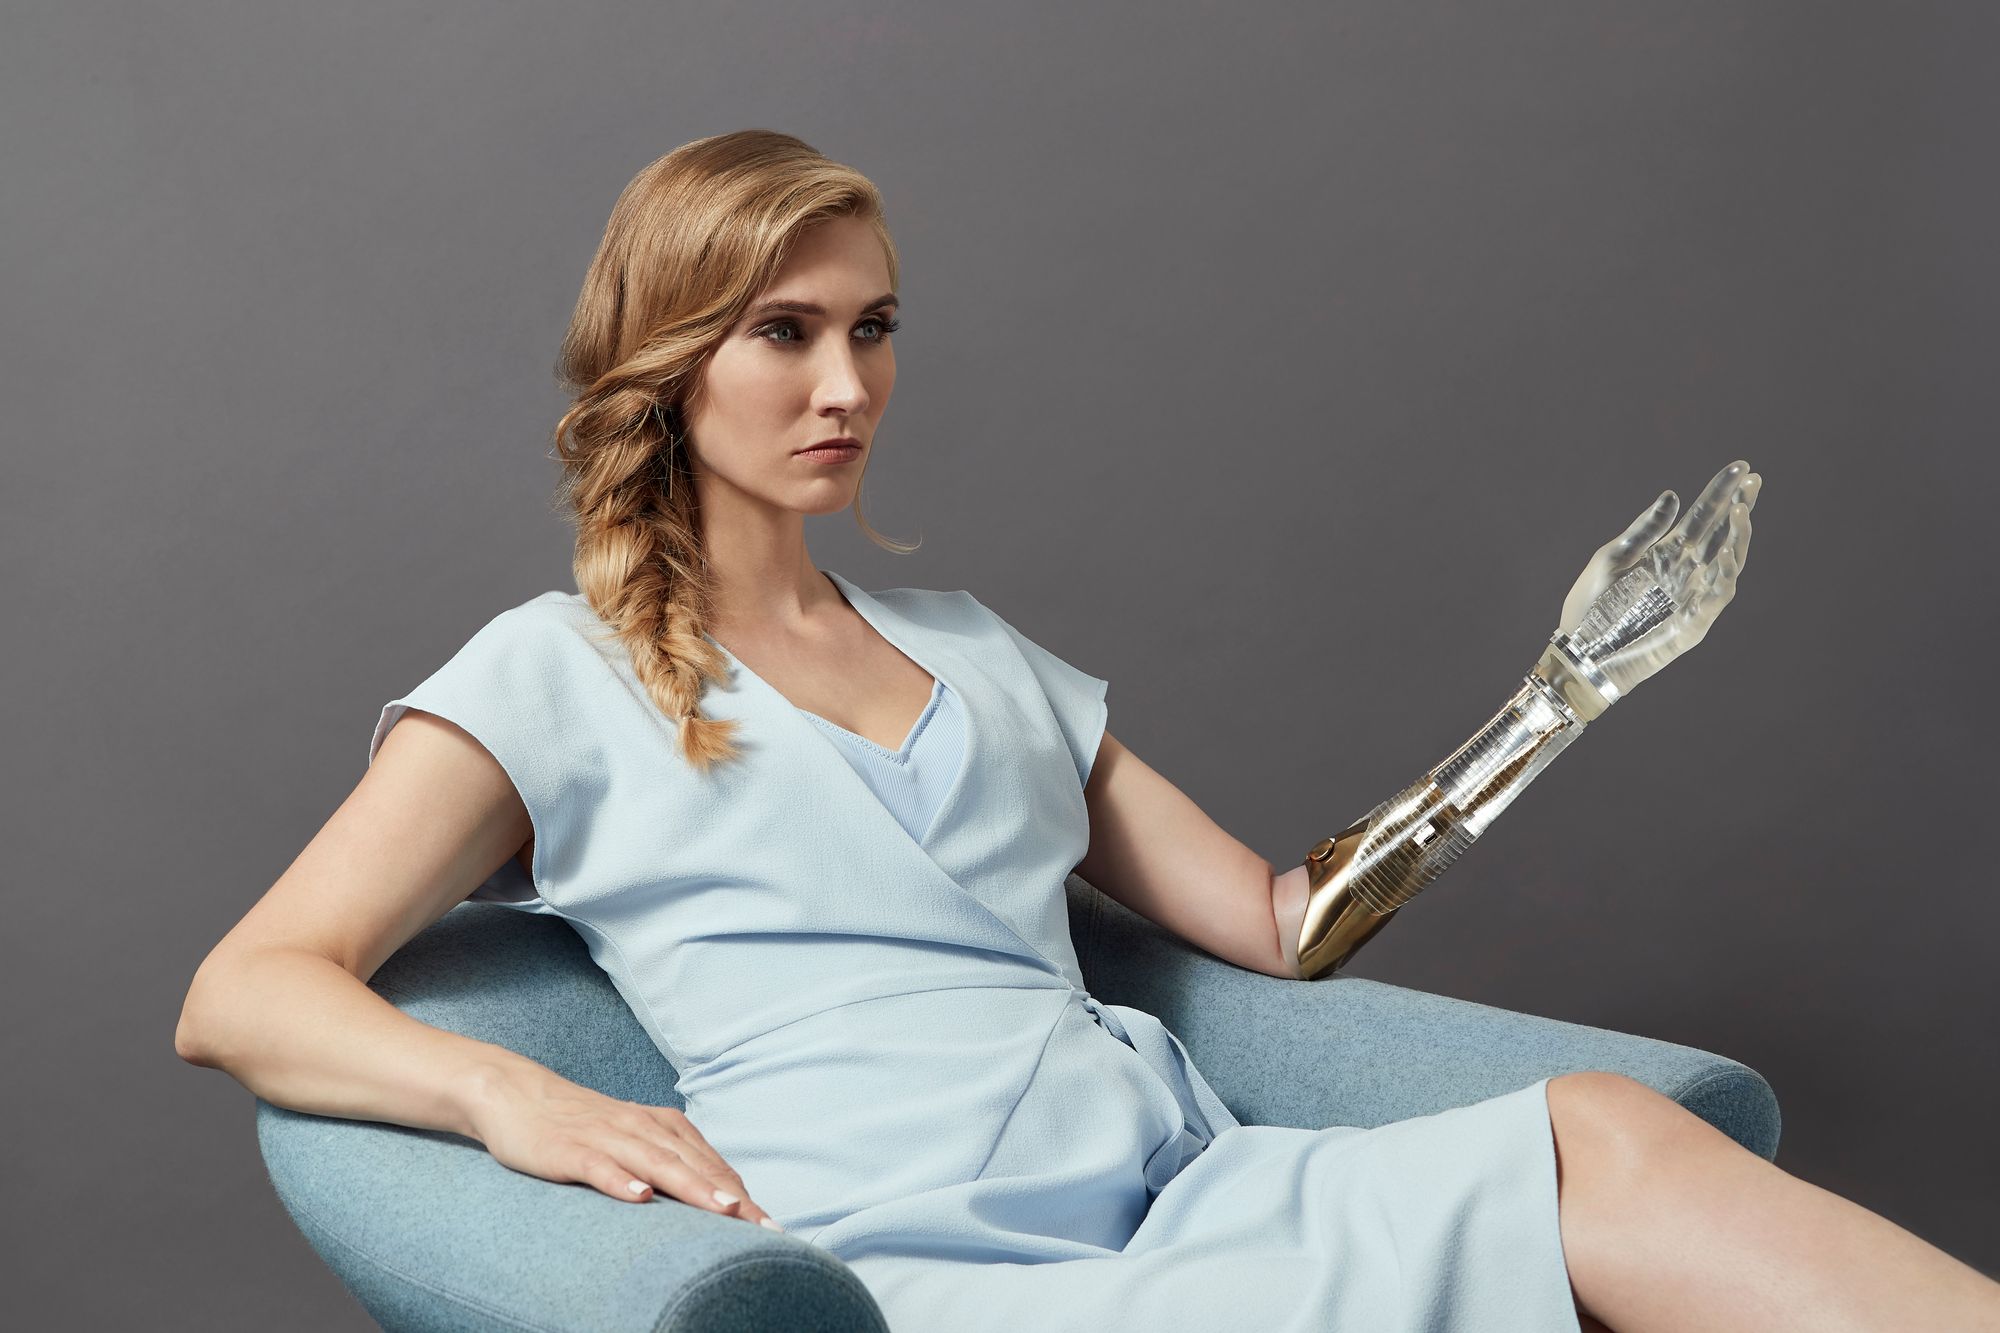 A blonde white woman is showen in a light blue dress. She extends her arm out and is modeling a prosthetic arm and hand that is glassy and semi-opaque.